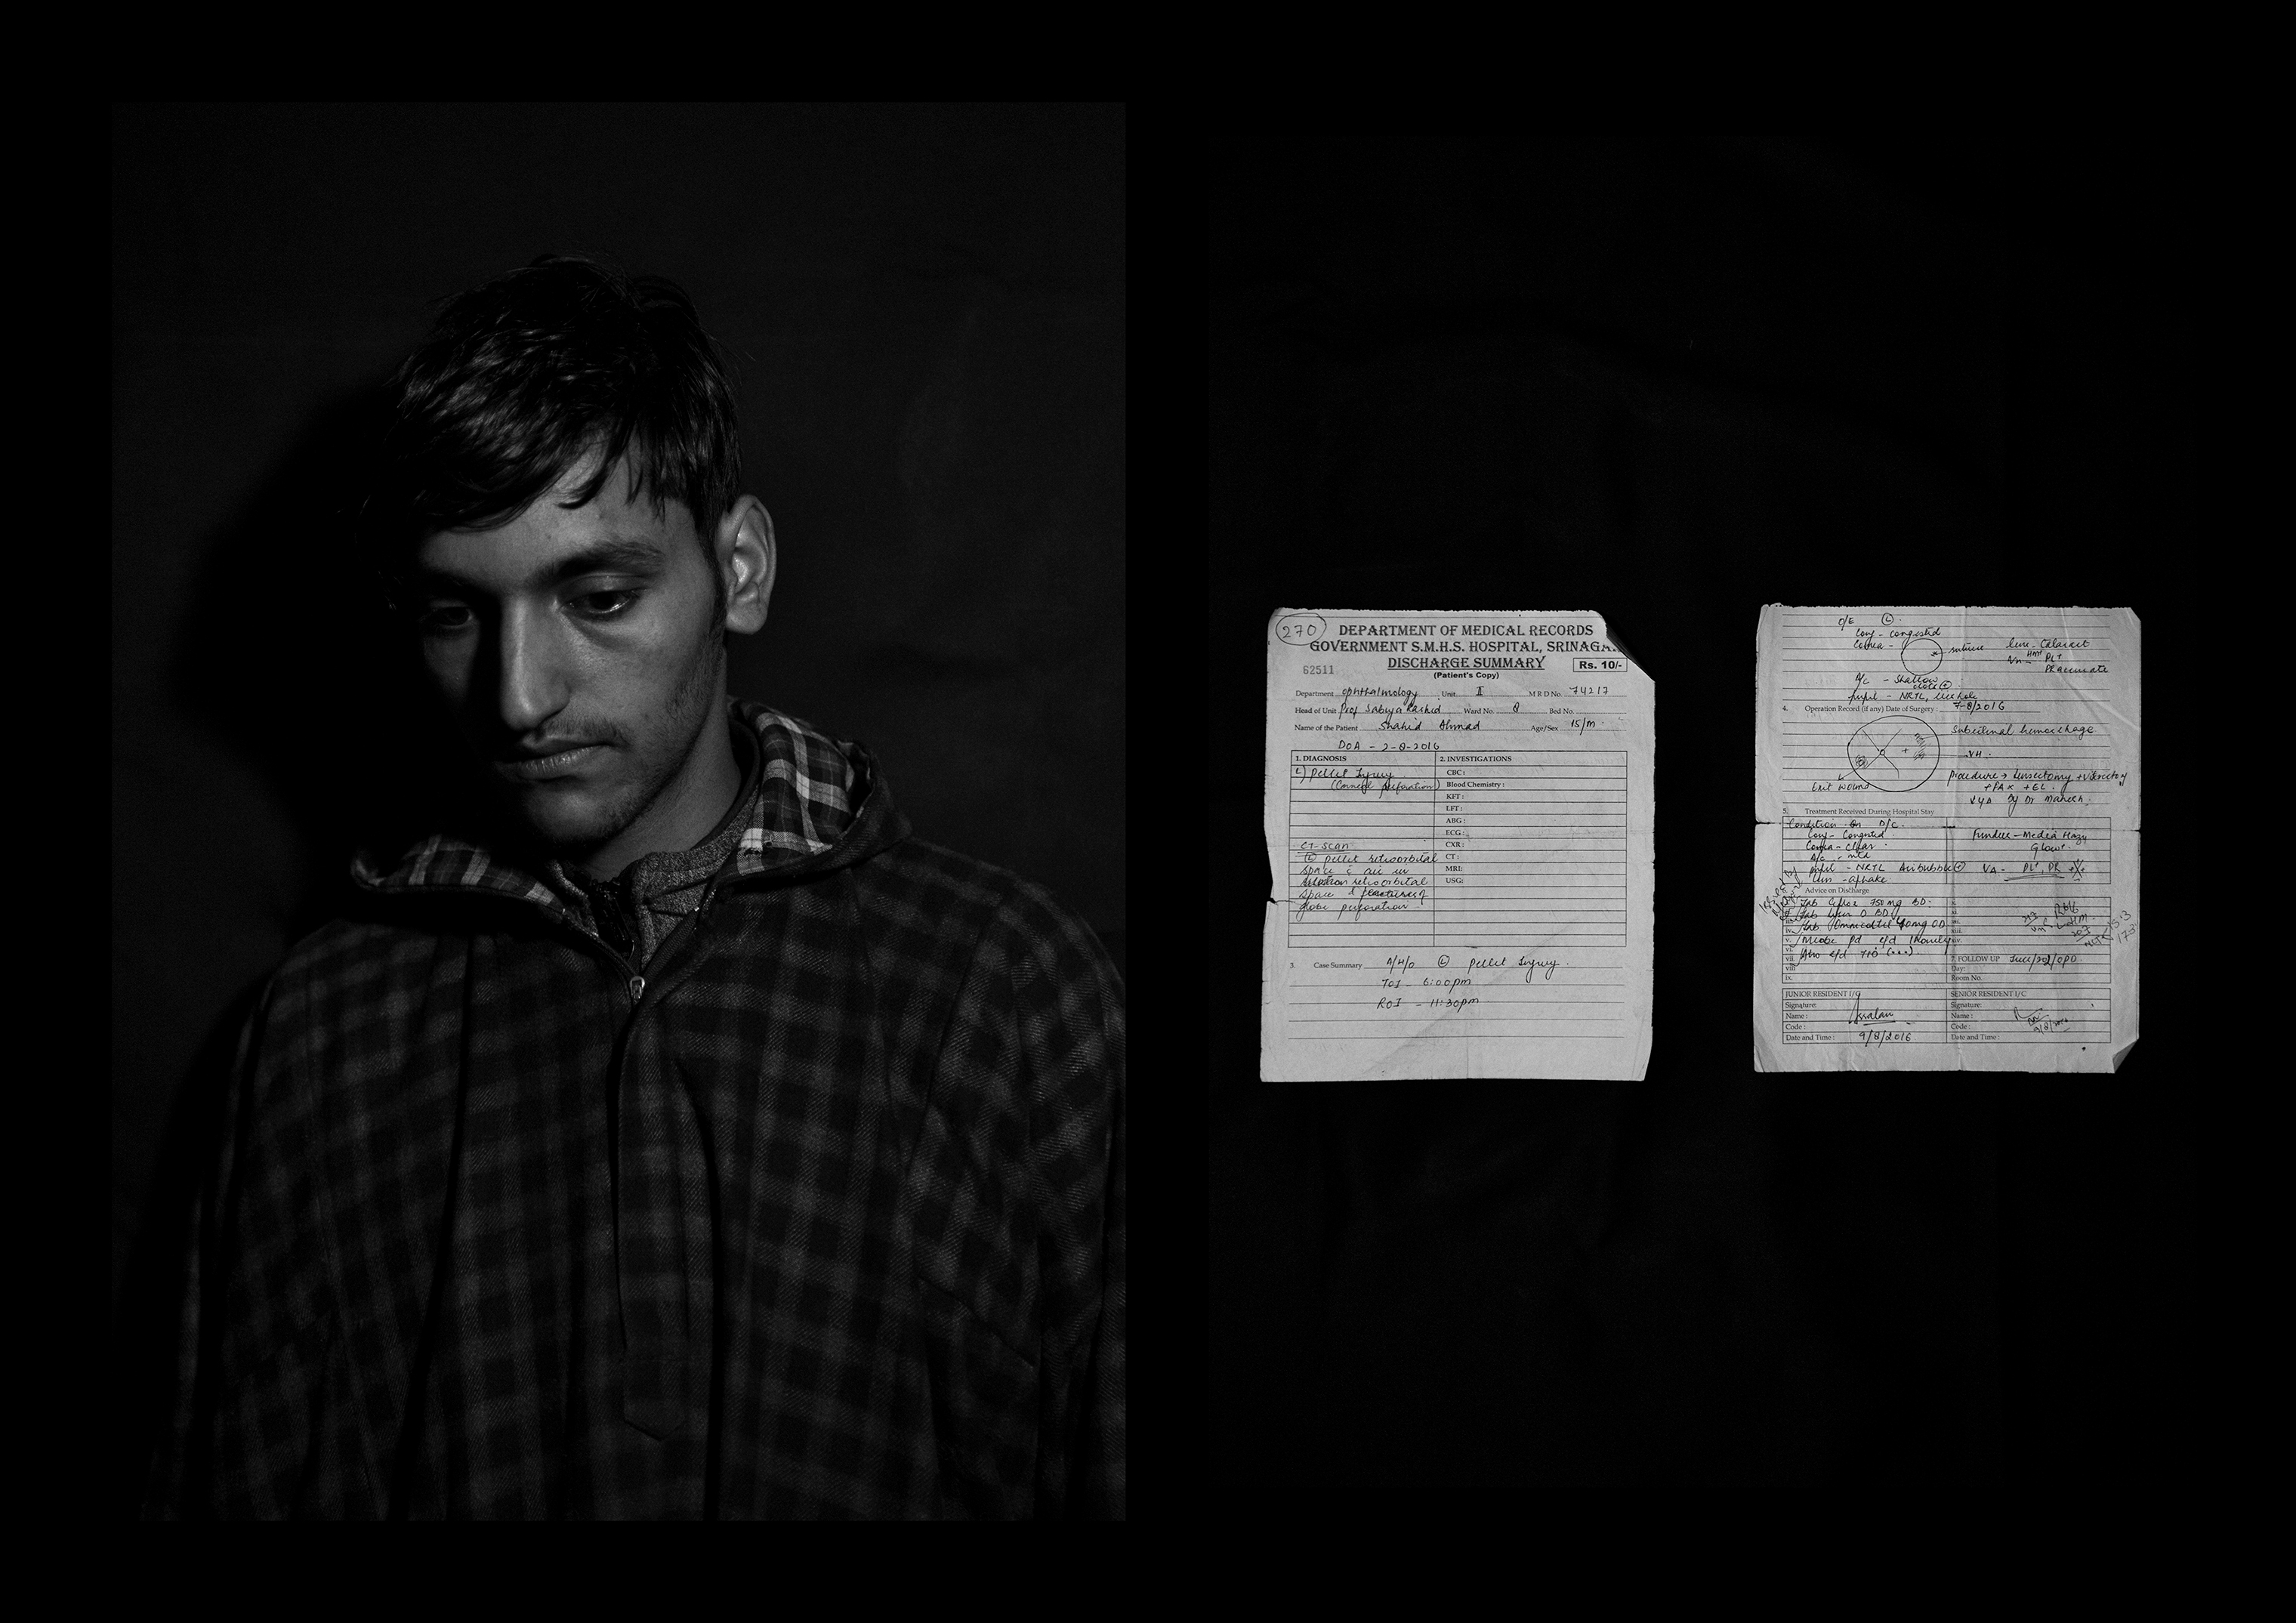 Shahid Ahmad Wani, 16 years old, from Achabal. He was forced to end his studies after being hit by 93 pellets all over his body, with two in the left eye. After three failed surgeries he is now able to only see shadows. To the right of his portrait, his medical records are pictured. (Camillo Pasquarelli)